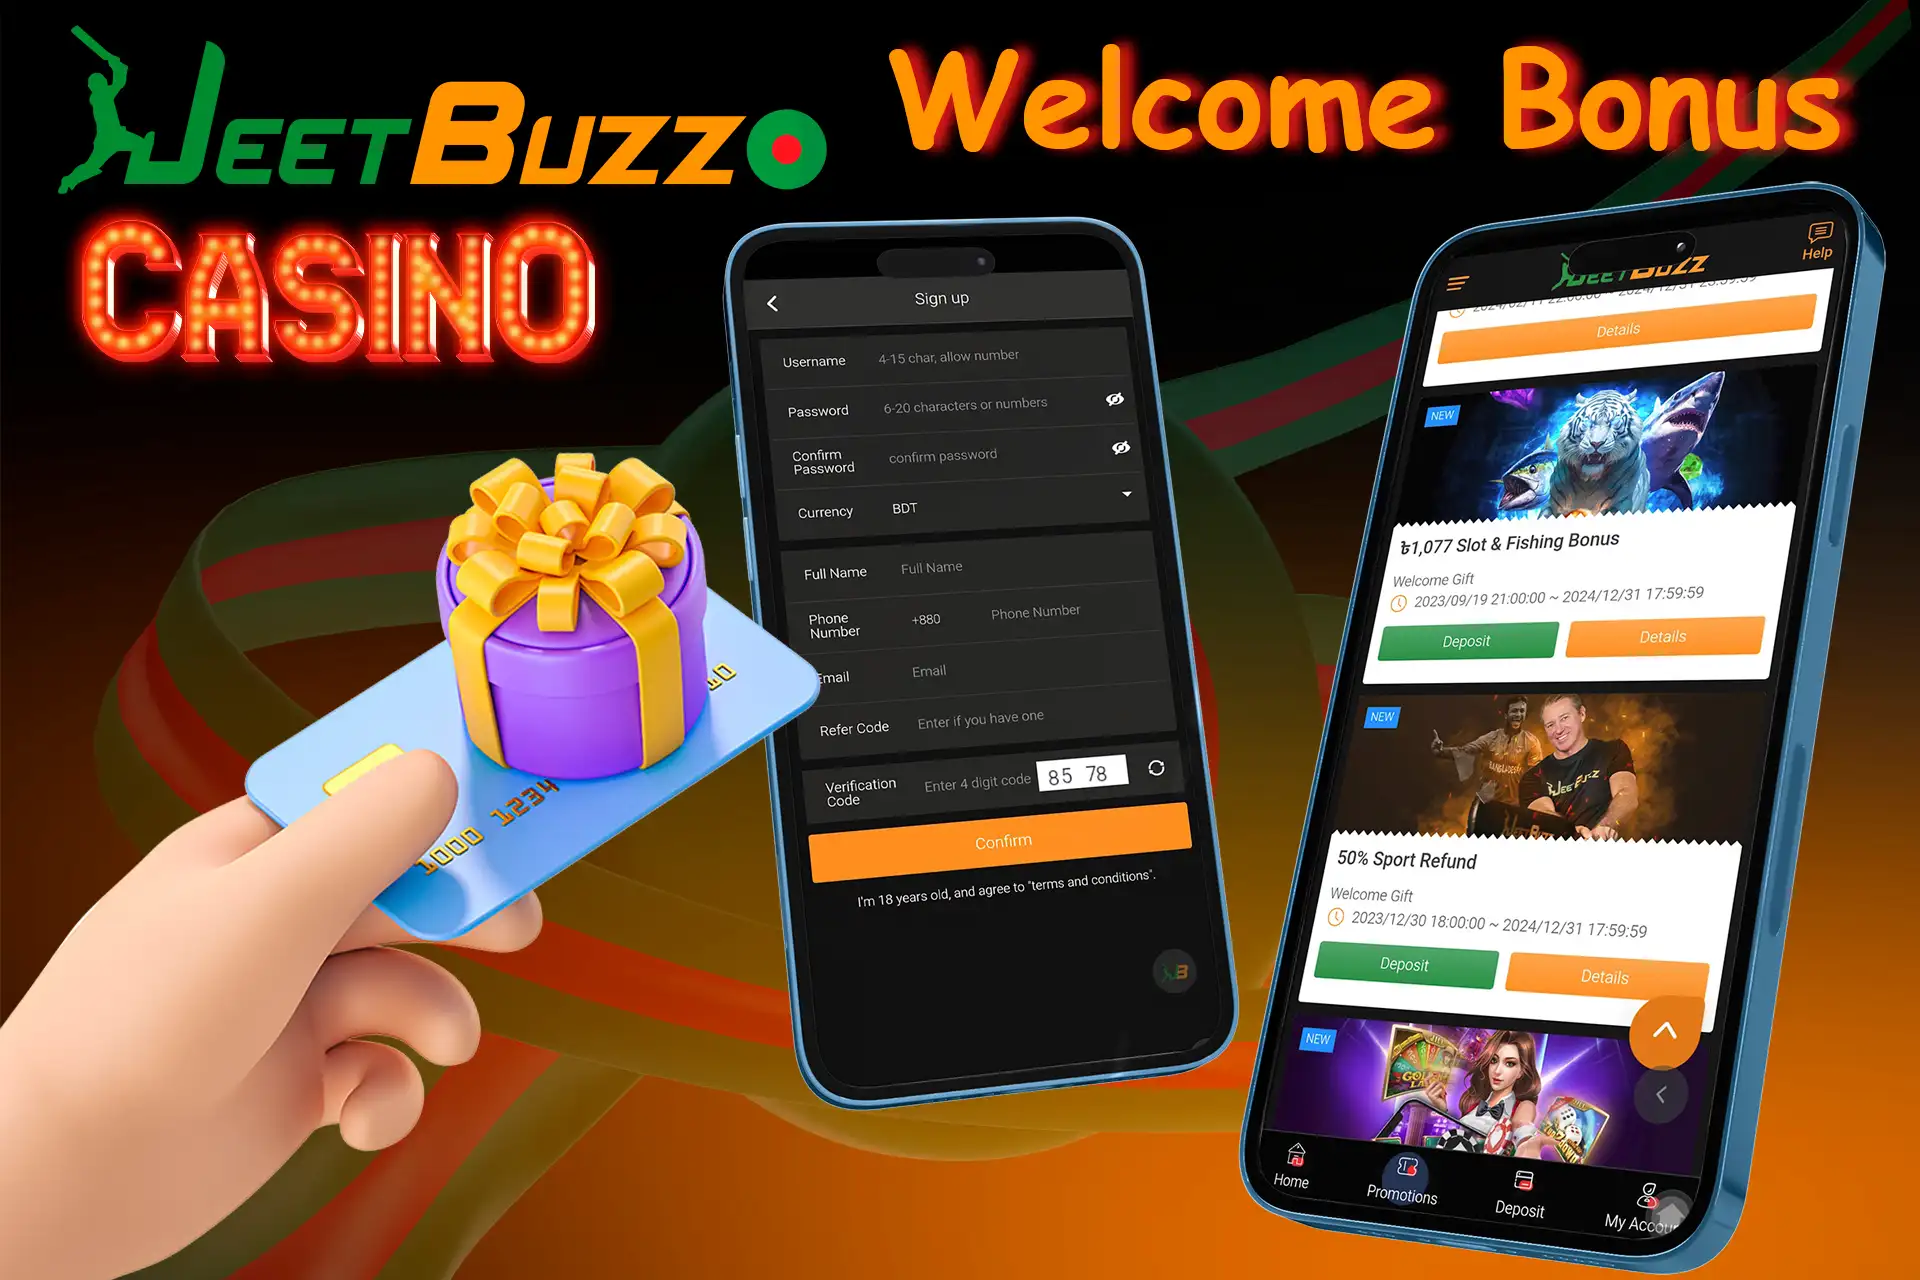 JeetBuzz welcome bonus: instructions for receiving